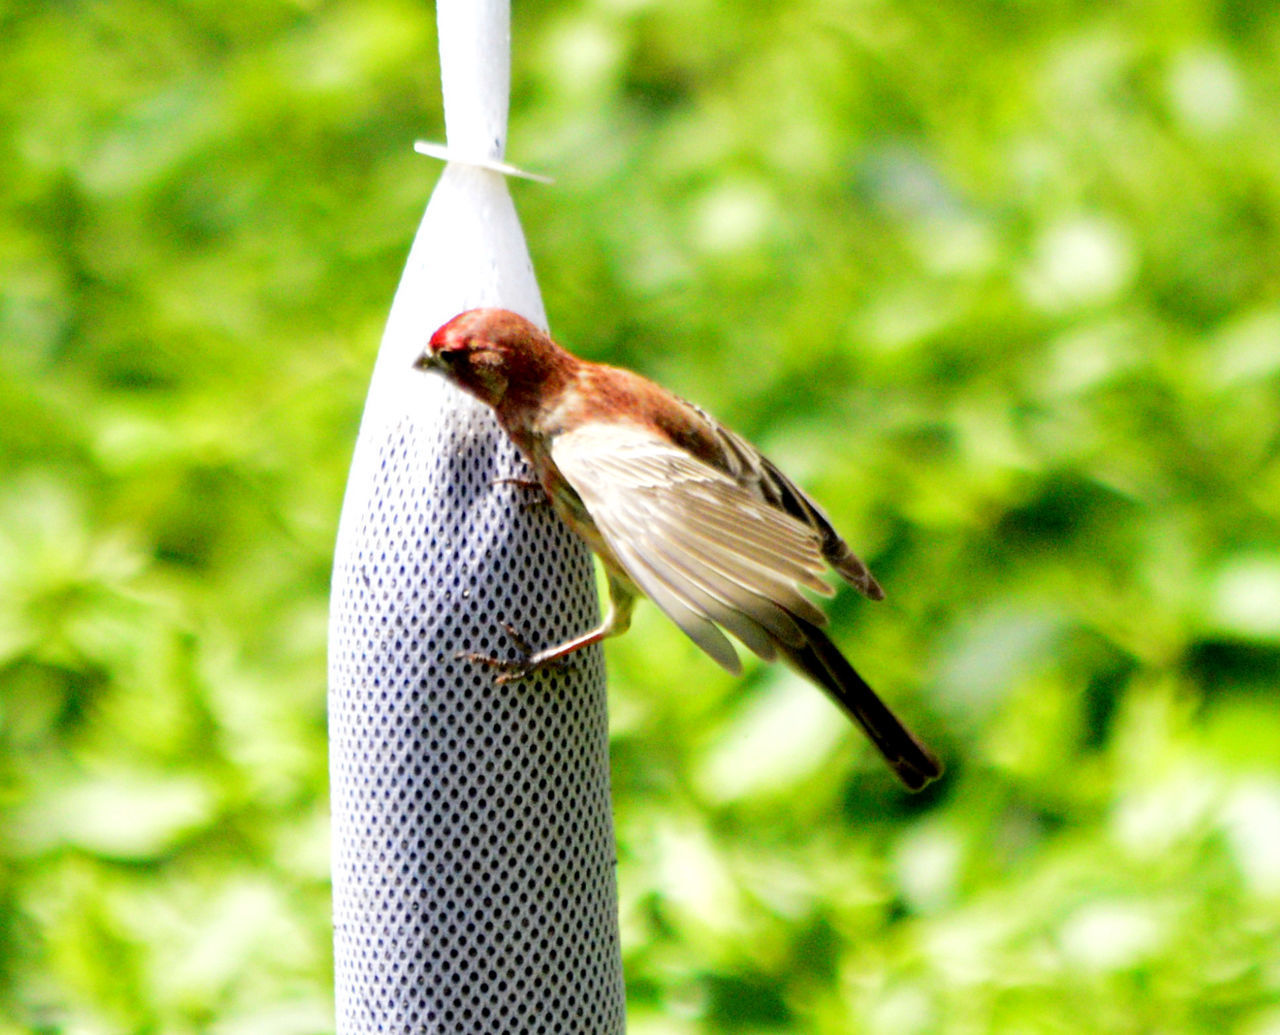 SIDE VIEW OF BIRD PERCHING ON A FEEDER